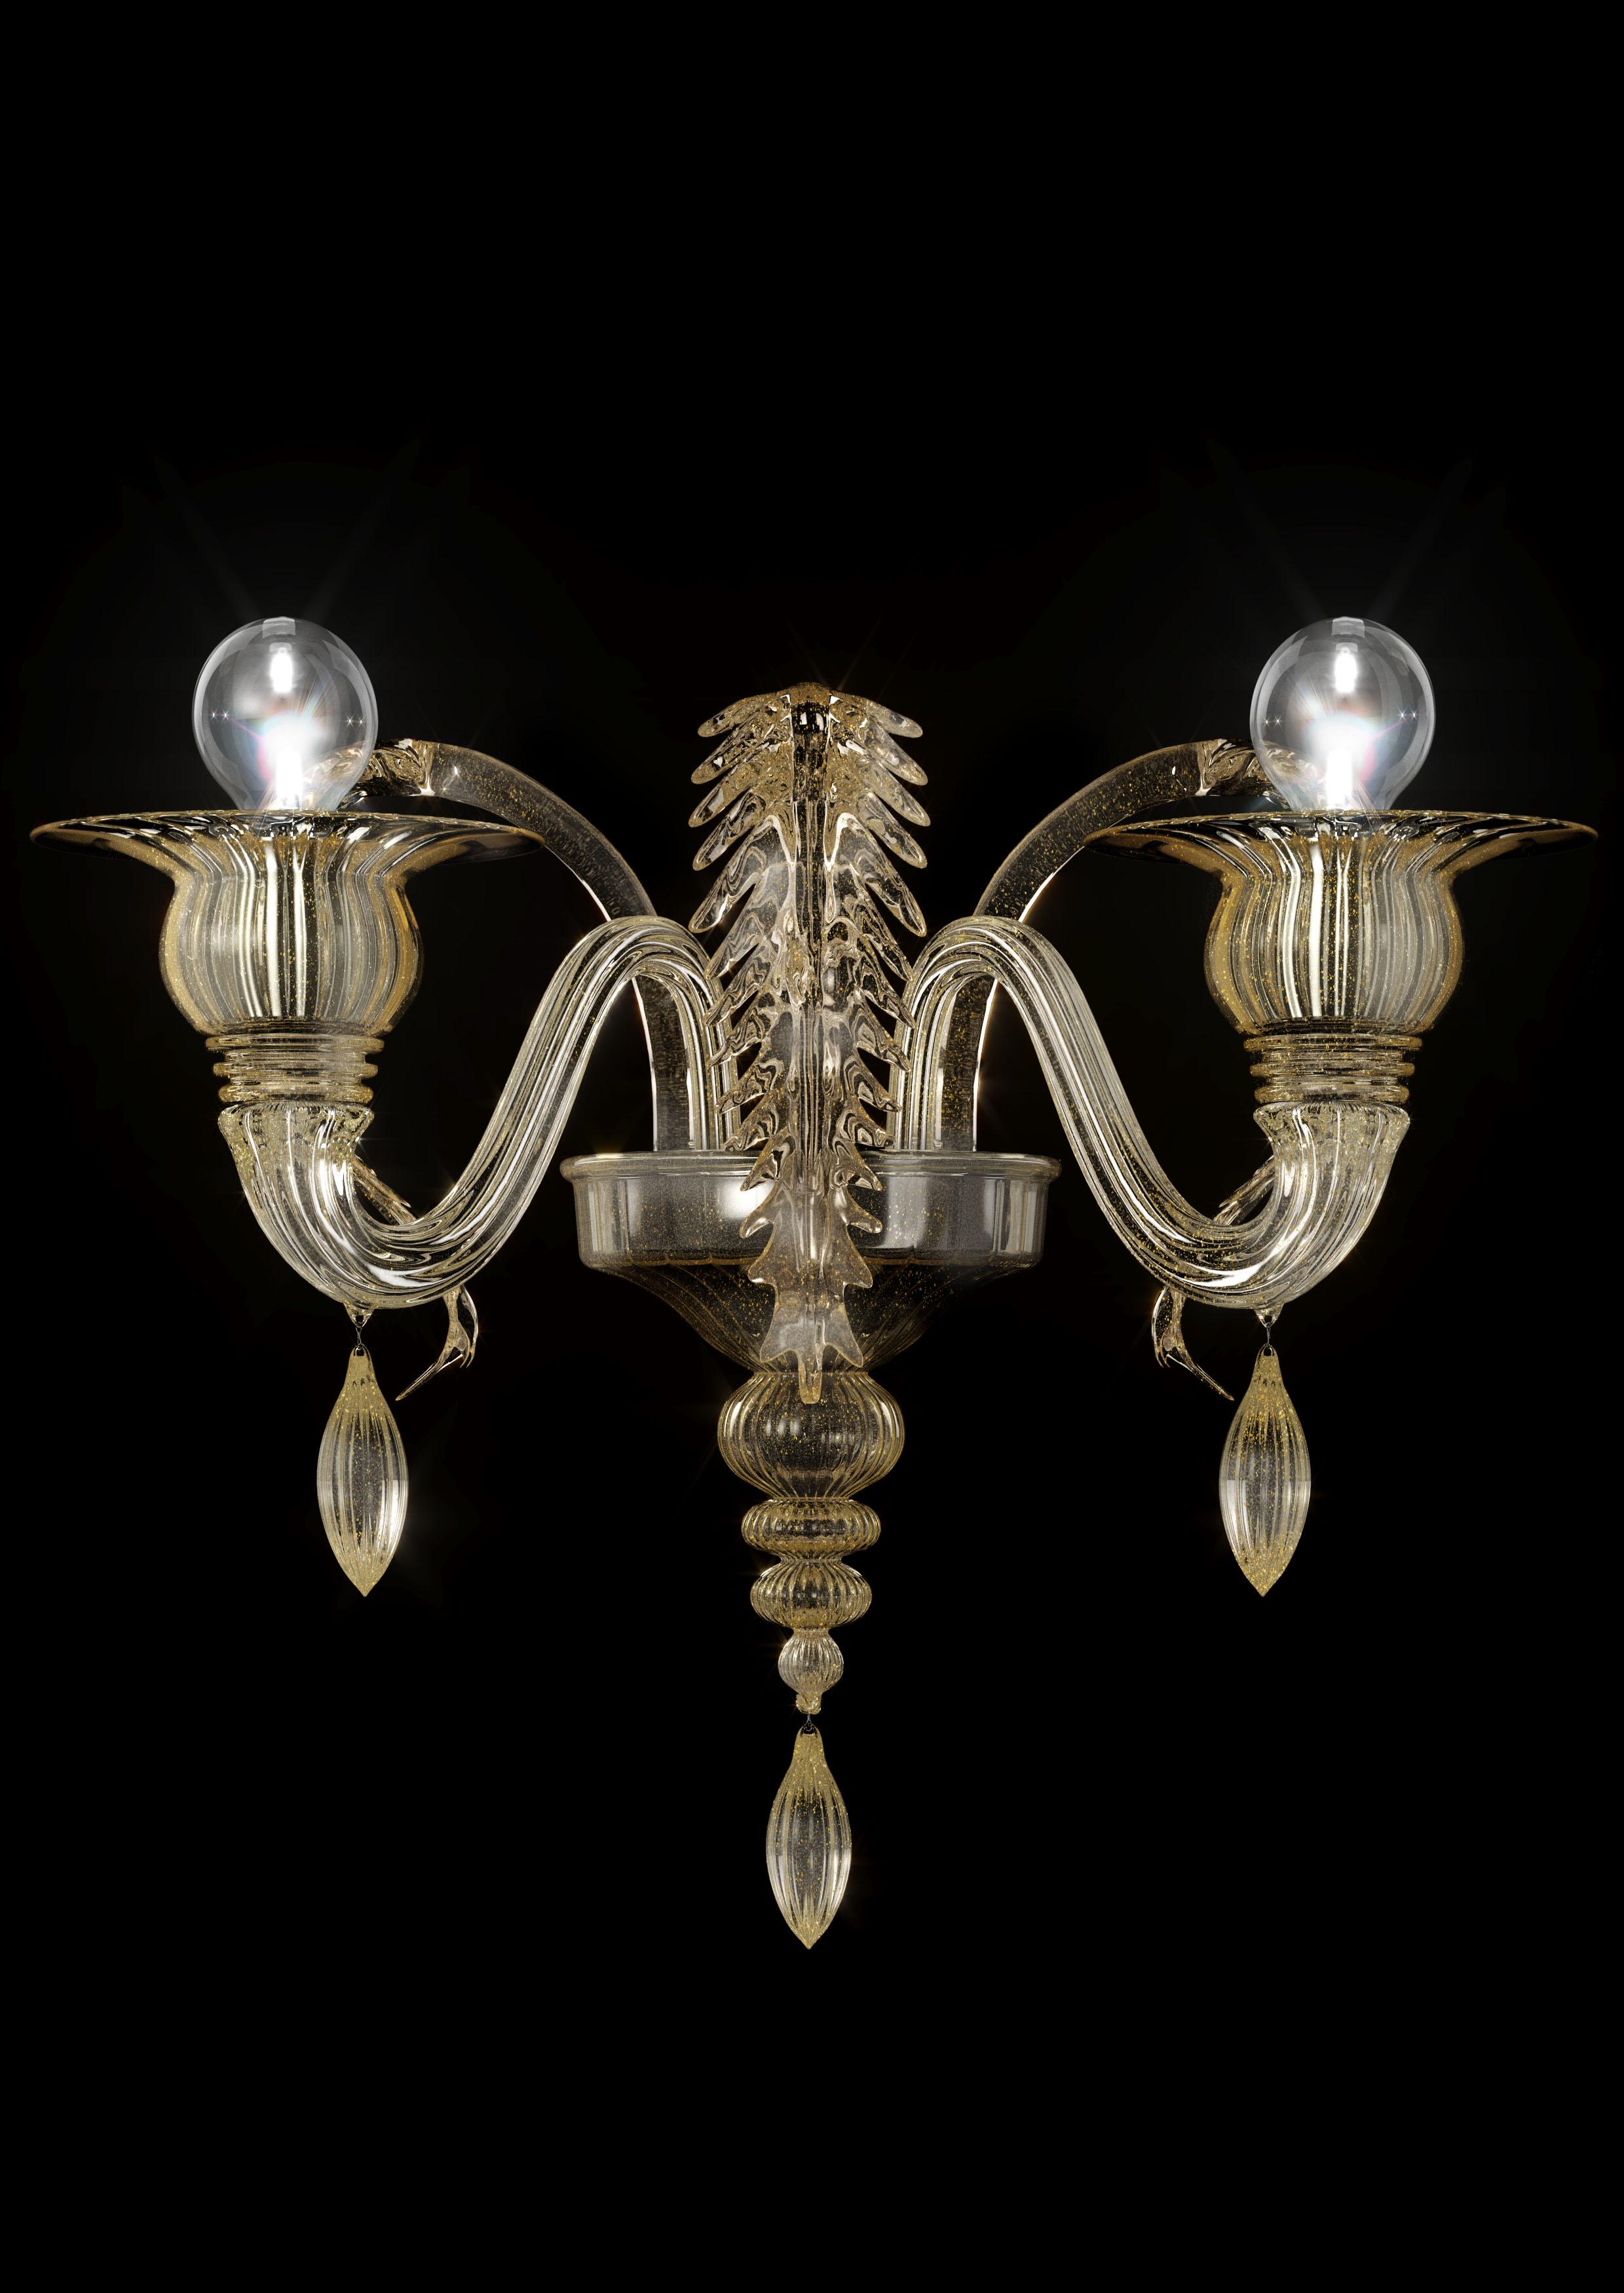 The Fez 5602 02 wall sconce was originally designed in 2011, and is shown here with 2-lights, gilded gold blown glass, and a galvanized gold finish. The gilded leaves and olive pendants feature in this collection of chandeliers and wall sconce with